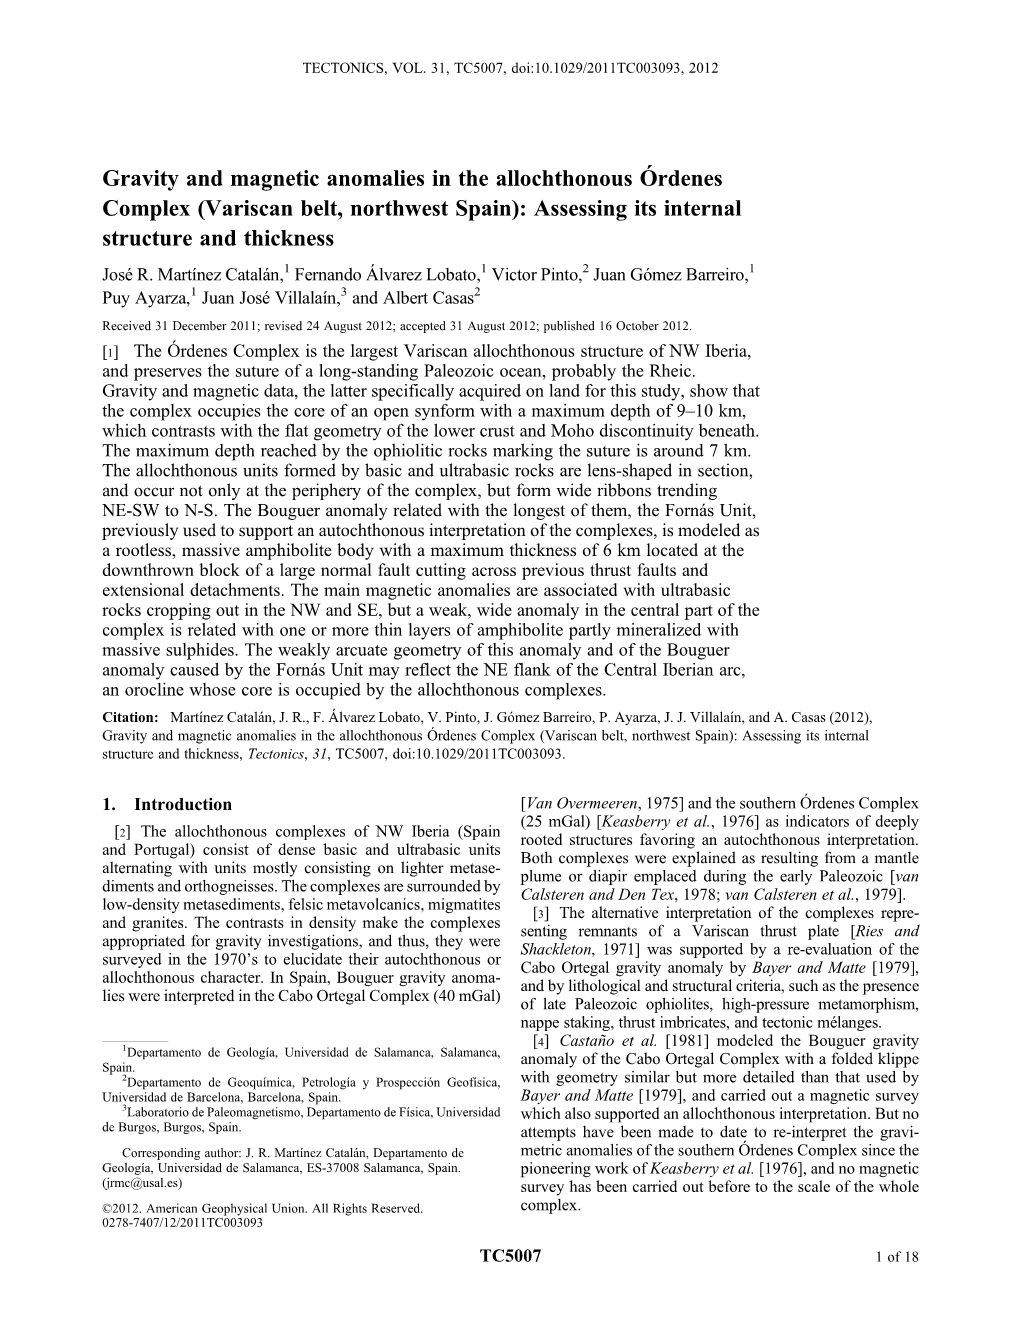 Gravity and Magnetic Anomalies in the Allochthonous Rdenes